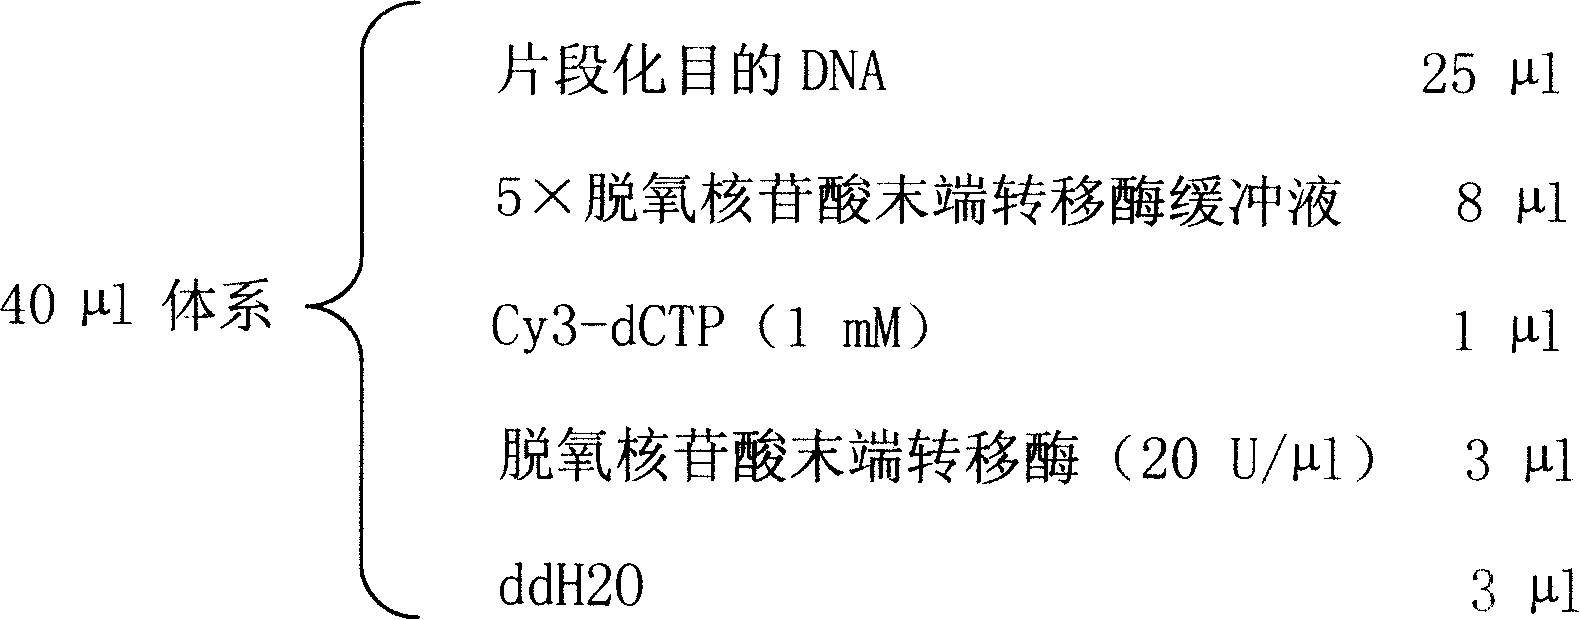 Oligonucleotide chip for detecting complete genome CpG island and uses thereof